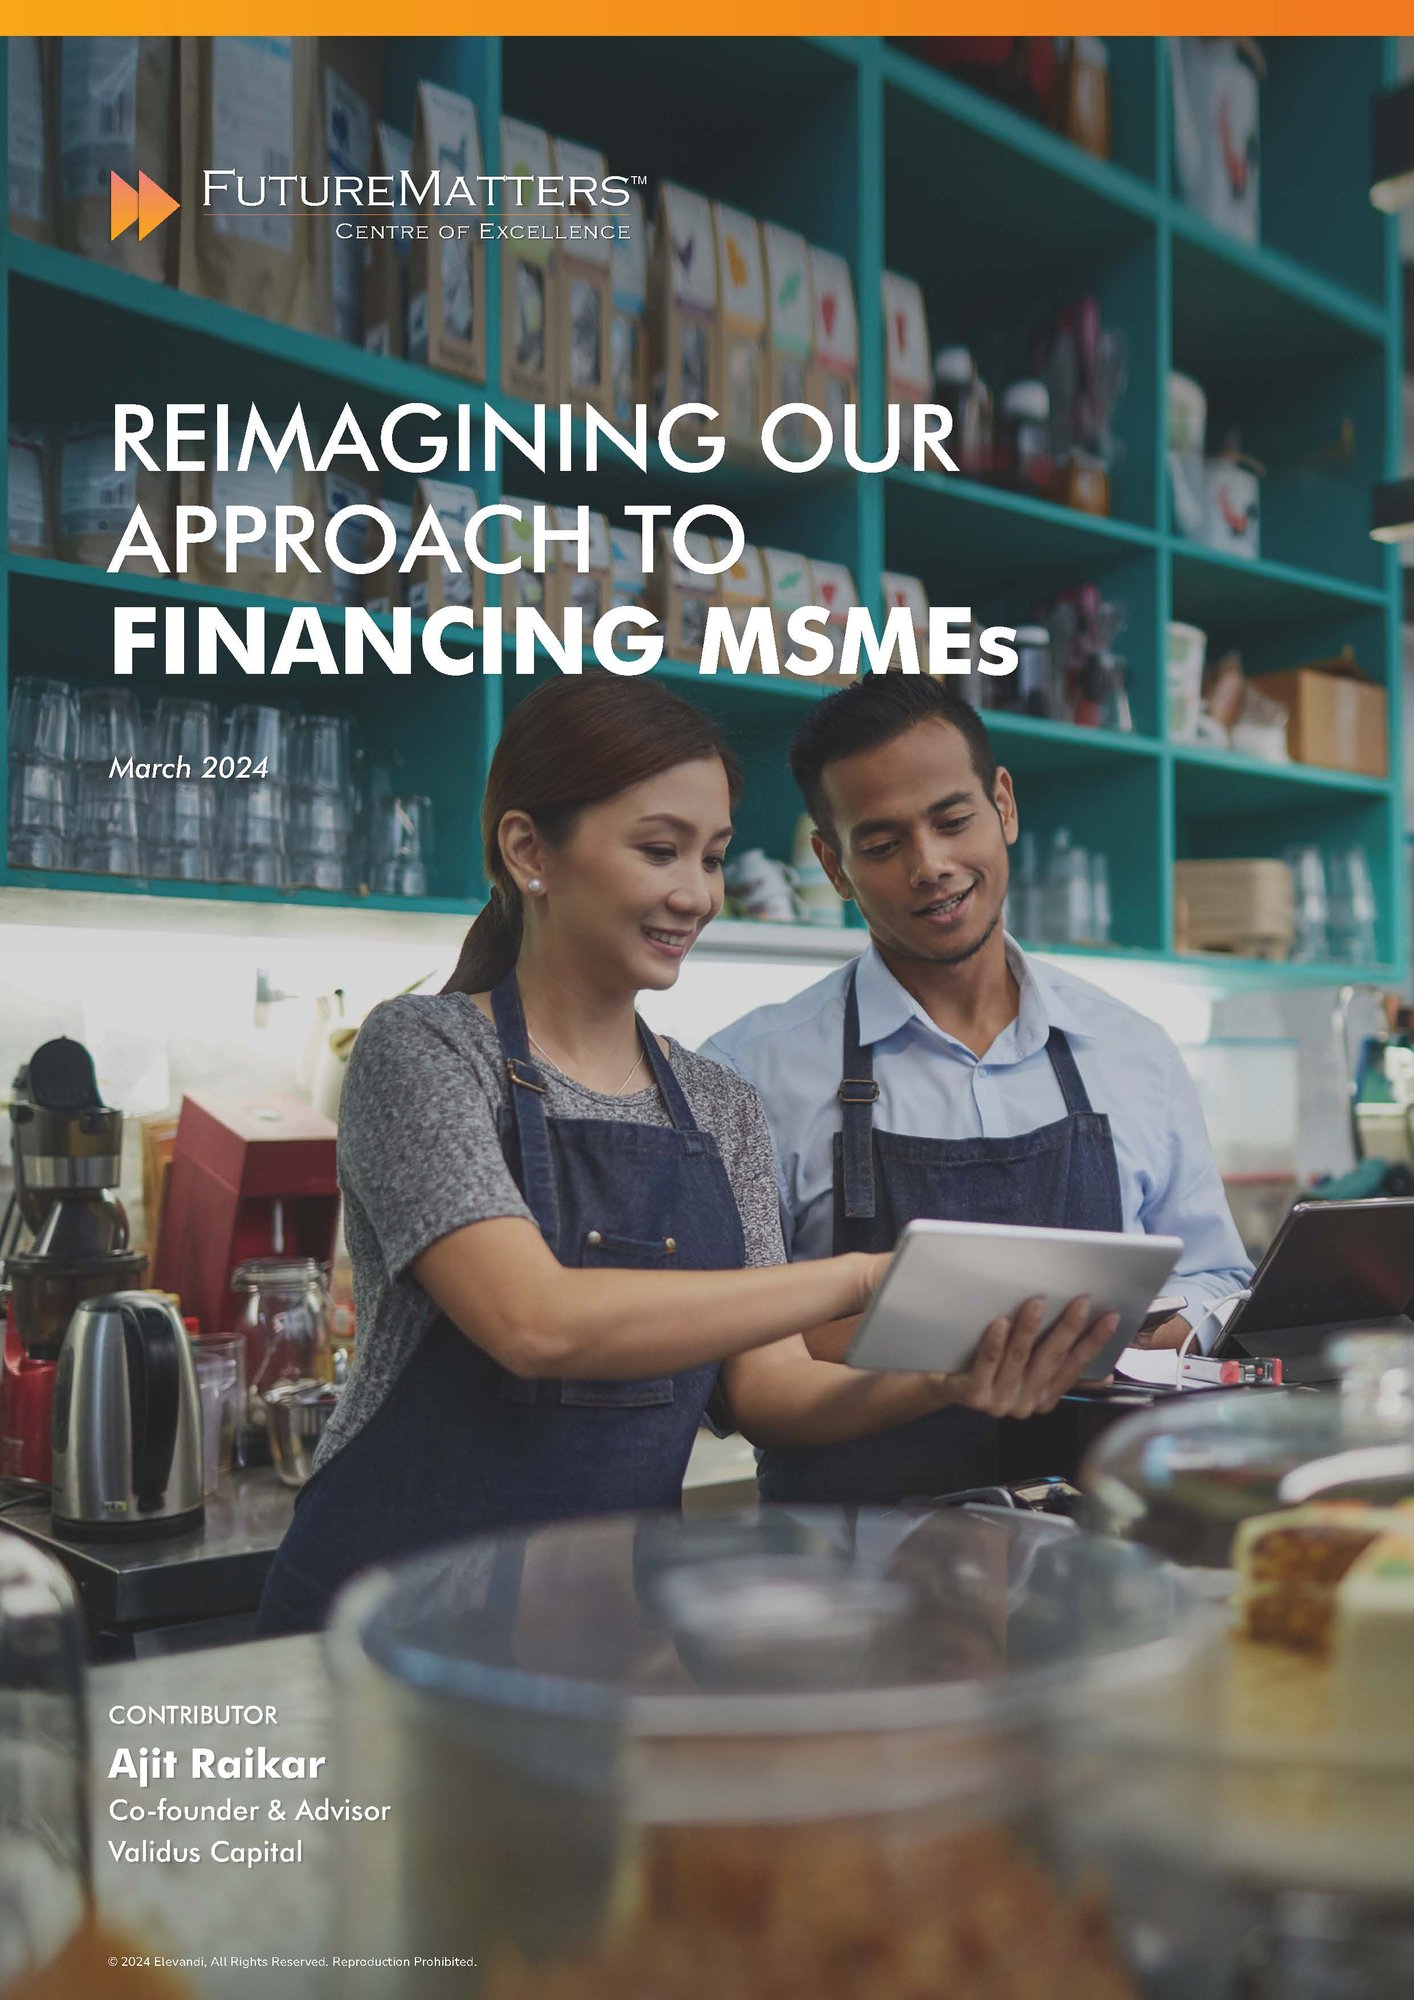 Reimagining our approach to financing MSMEs - Ajit Raikar - March 2024-1